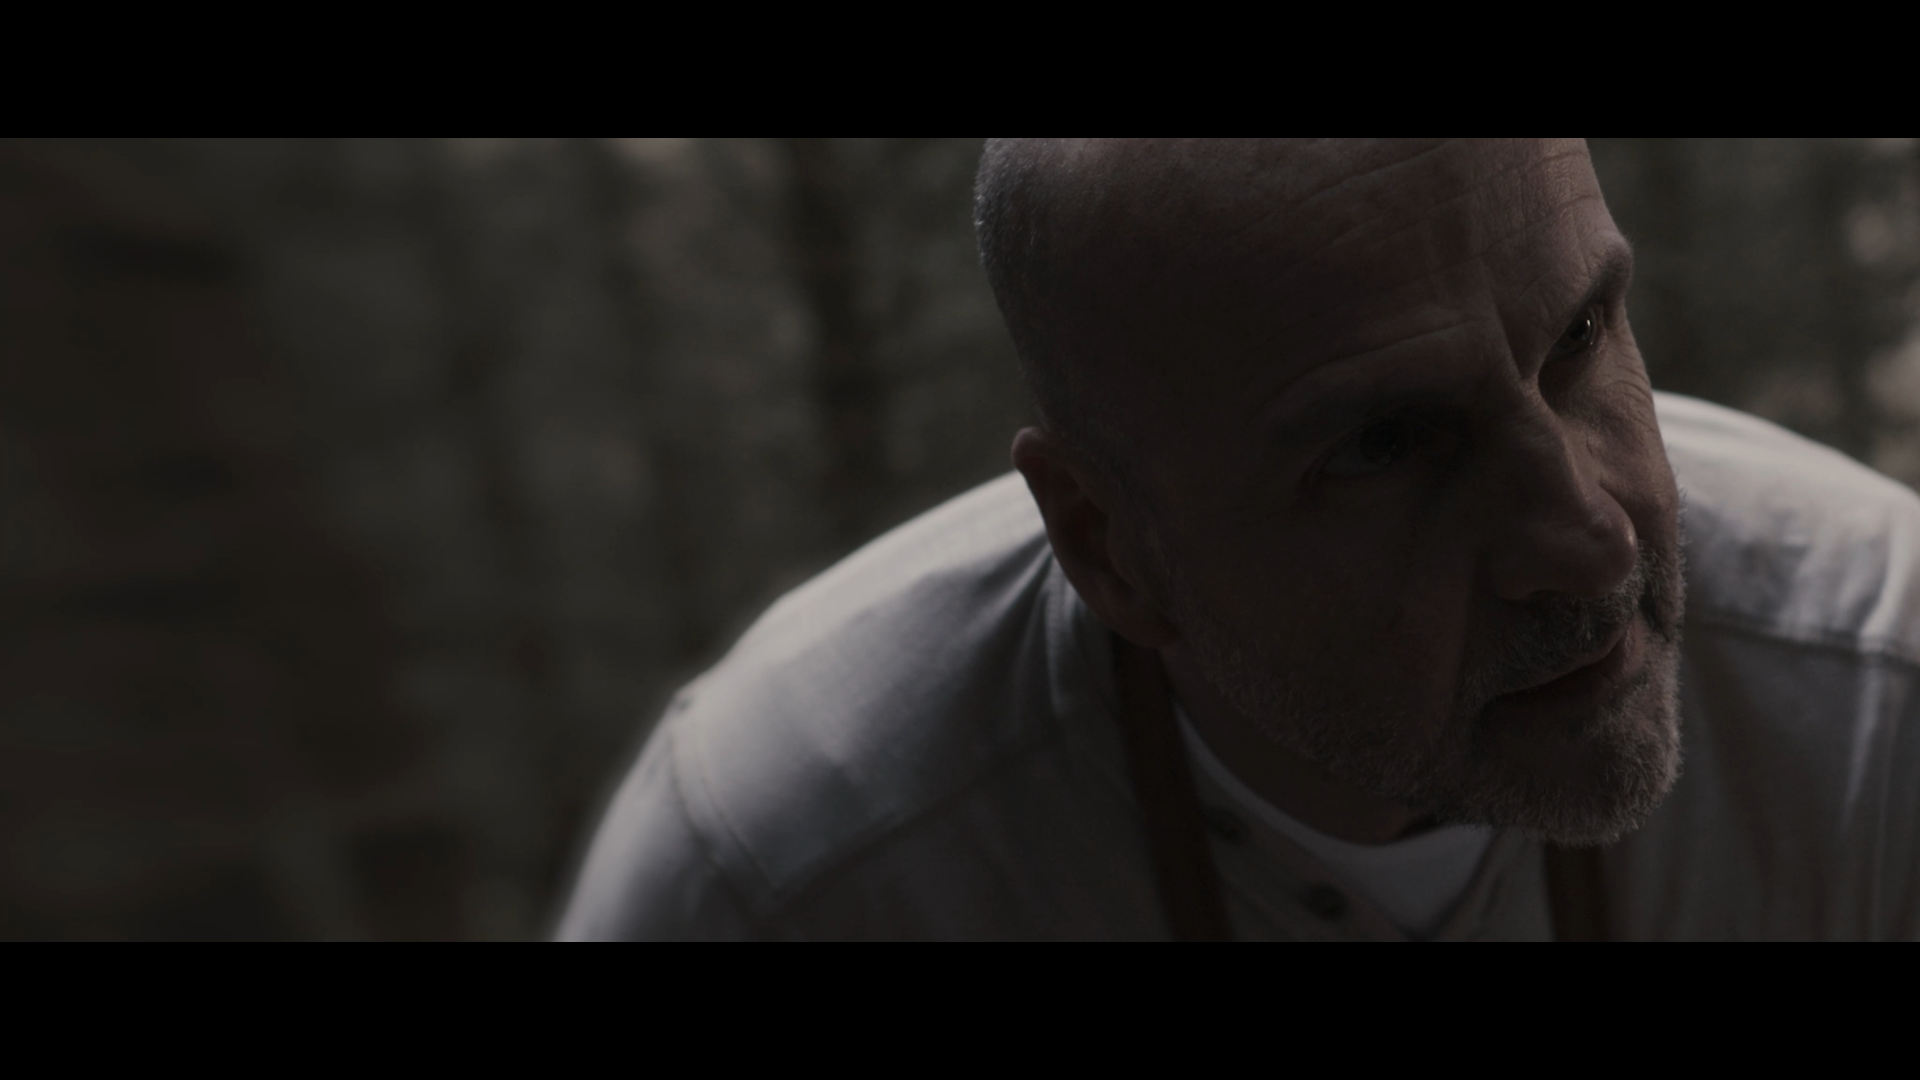 BA Film and Moving Image Production final film by Laurence Jones depicting a 7 minute, gritty and surreal short film